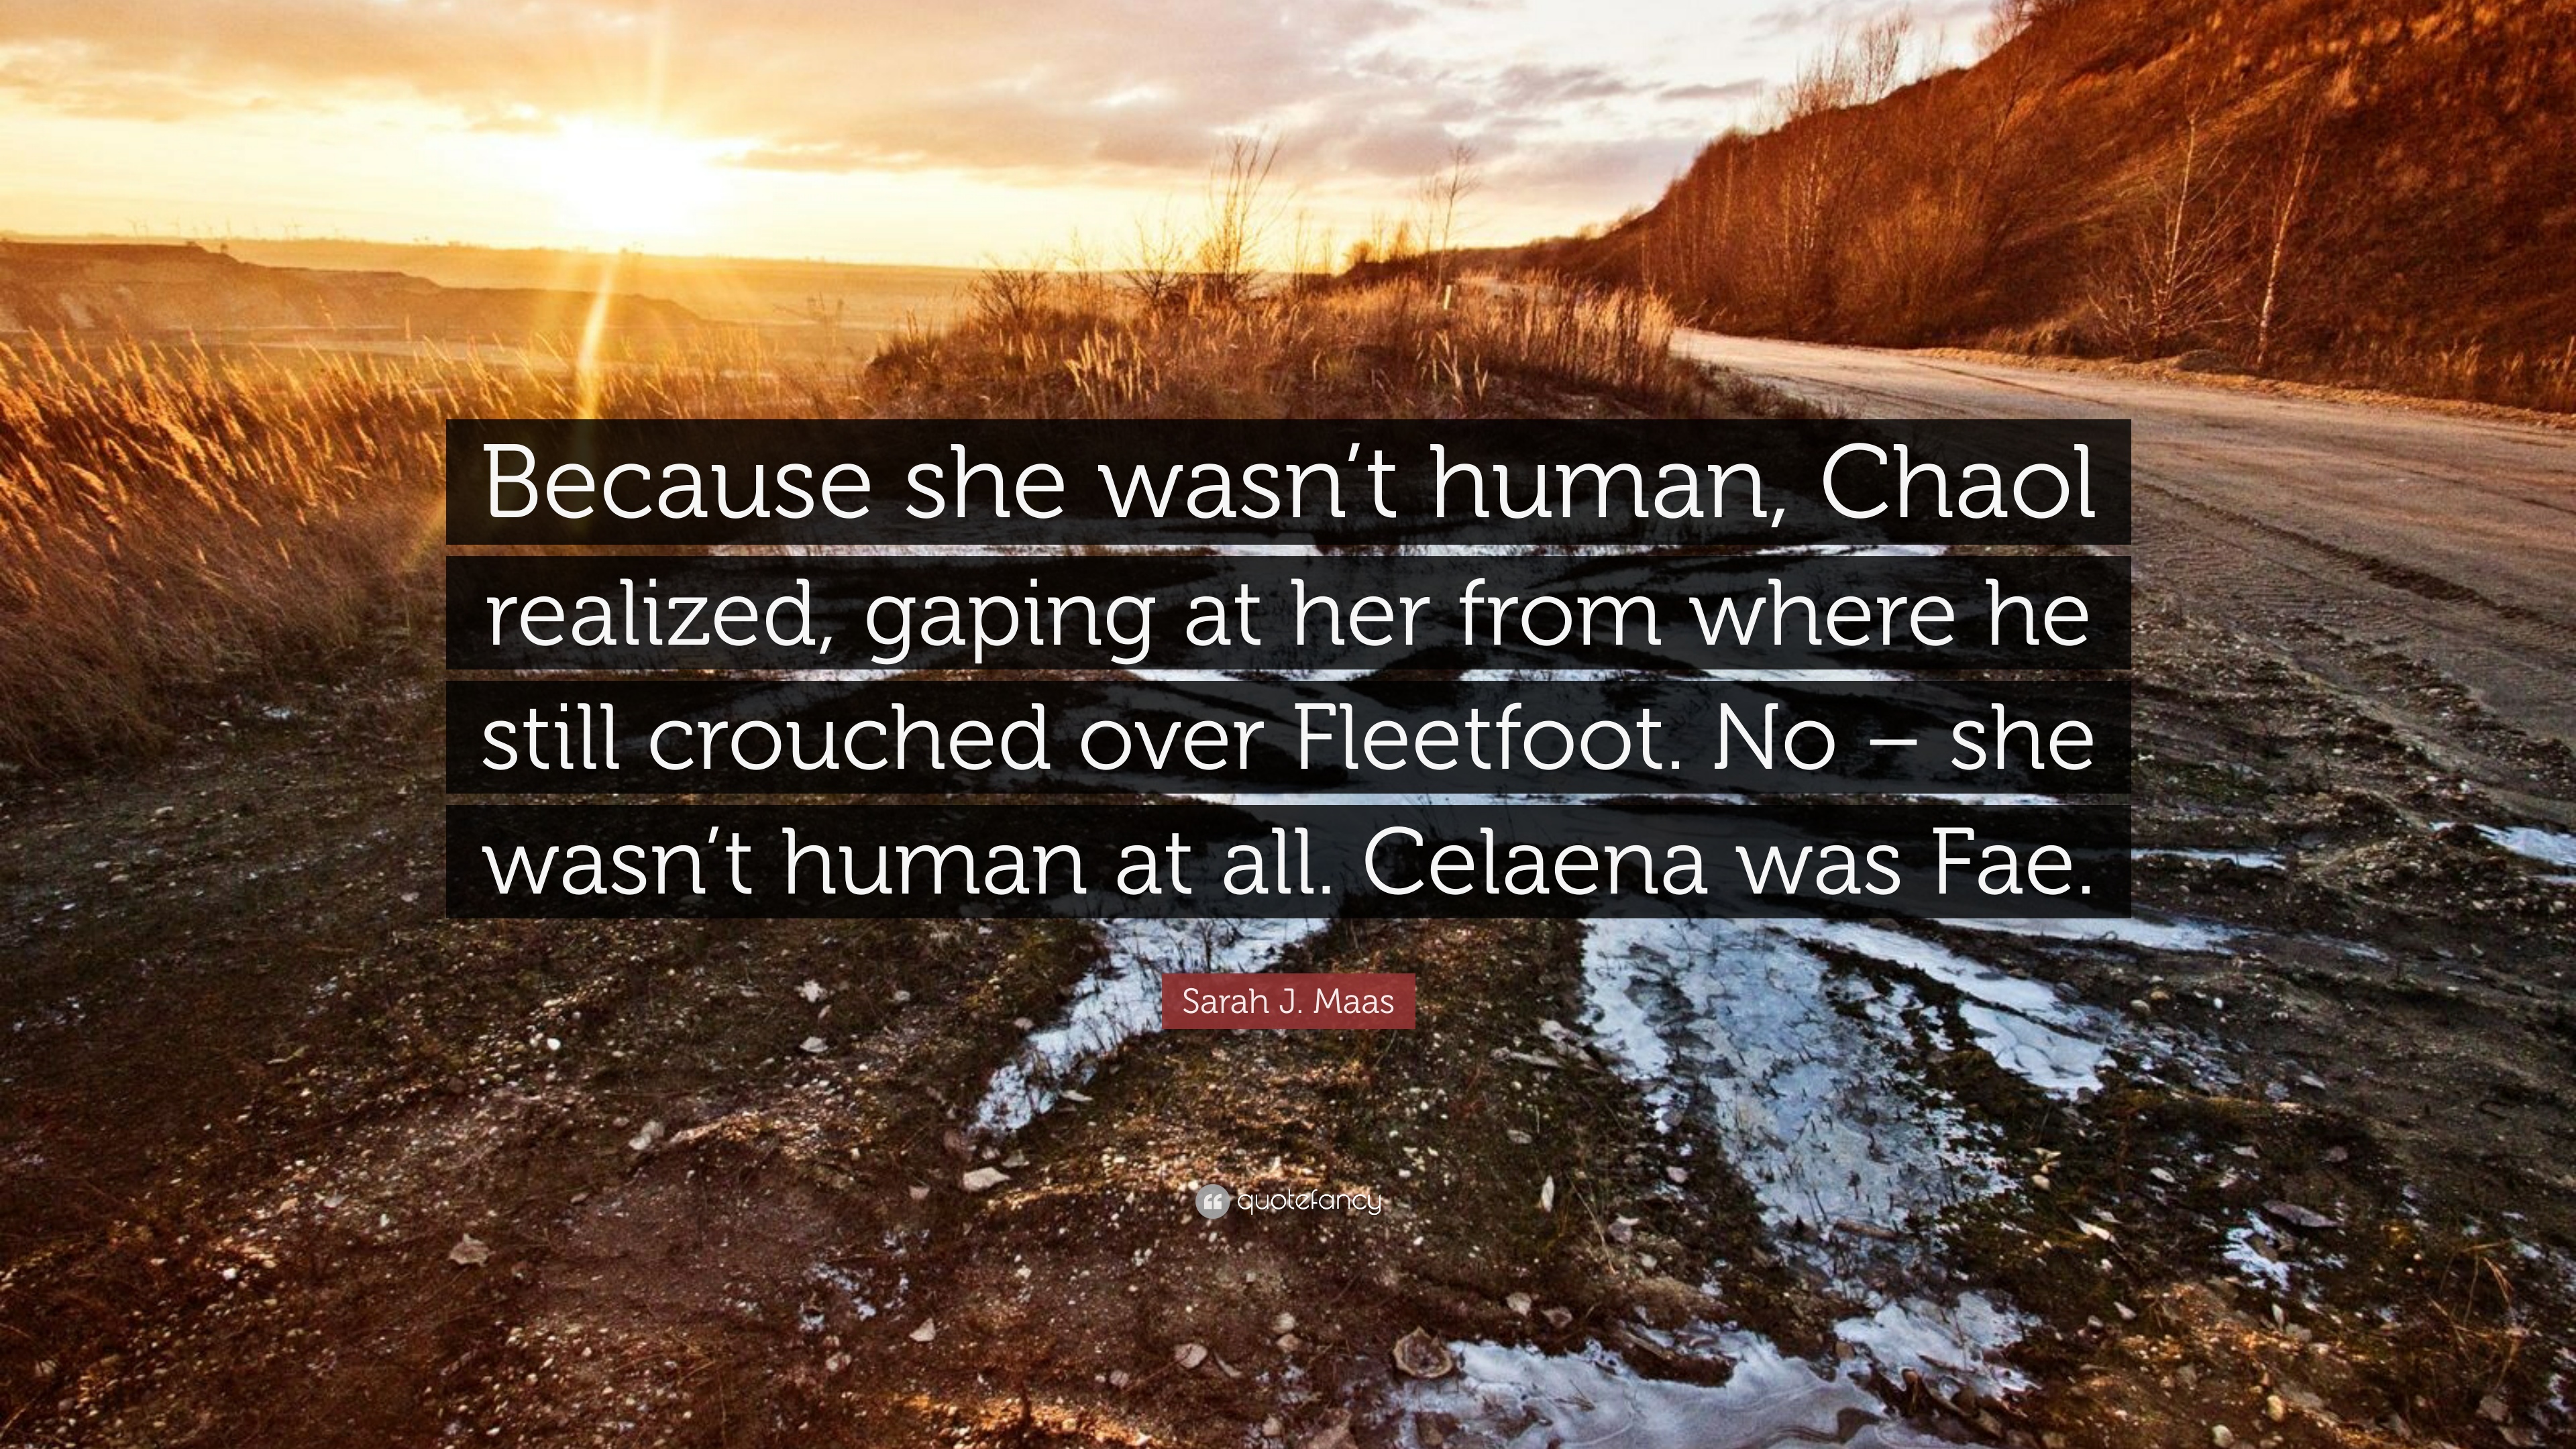 Sarah j maas quote âbecause she wasnt human chaol realized gaping at her from where he still crouched over fleetfoot no â she wasnt humâ